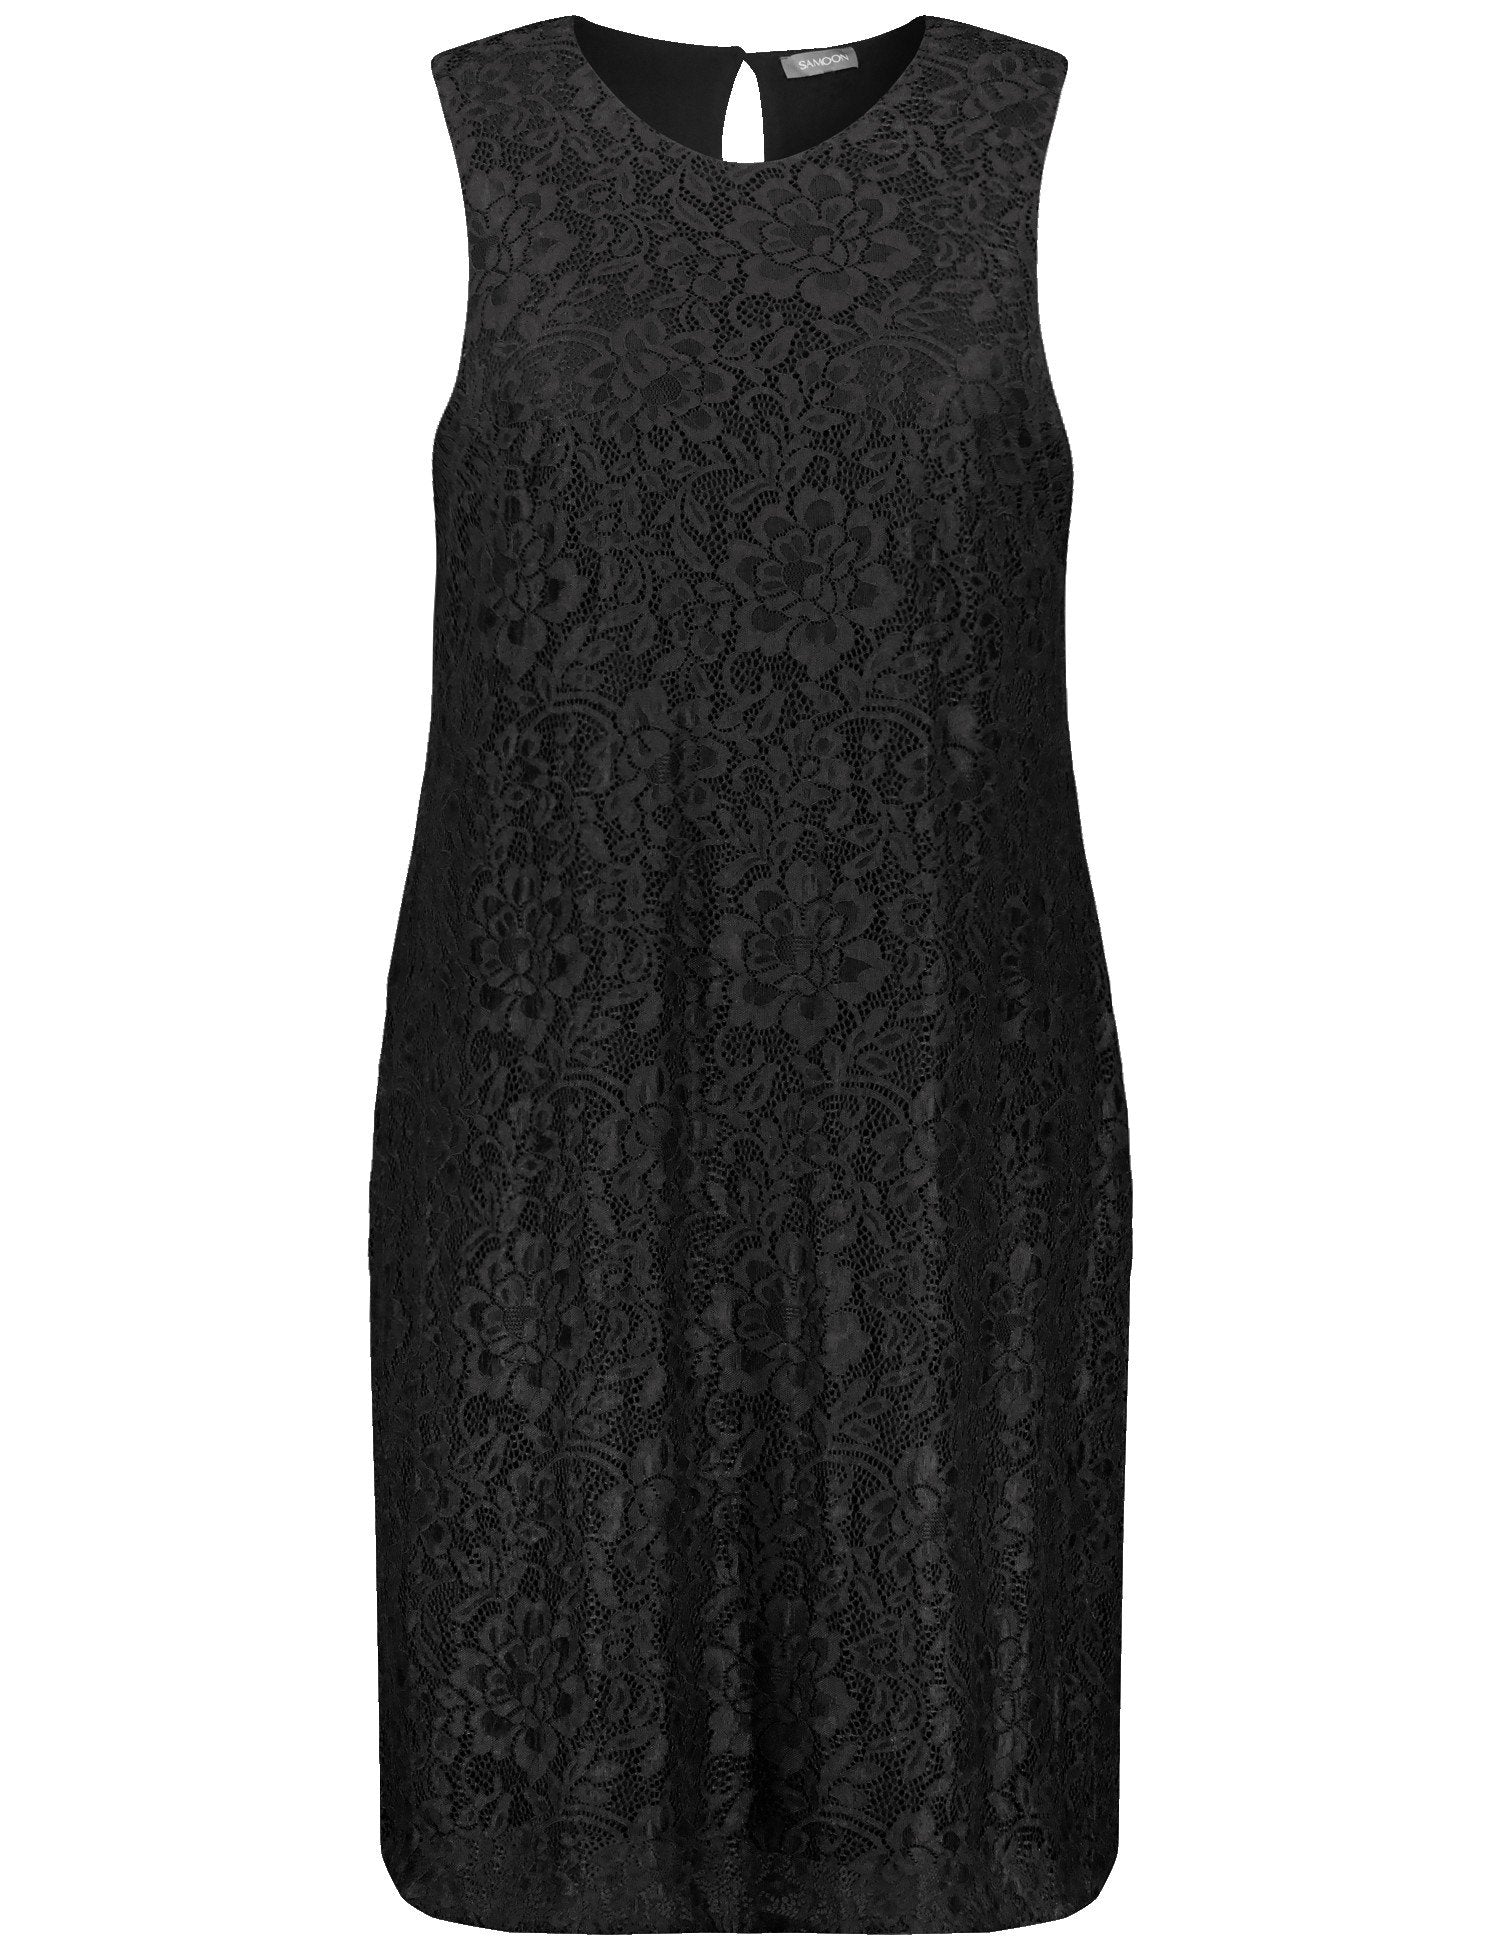 Sleeveless Lace Dress With Stretch For Comfort_480016-21056_1100_07